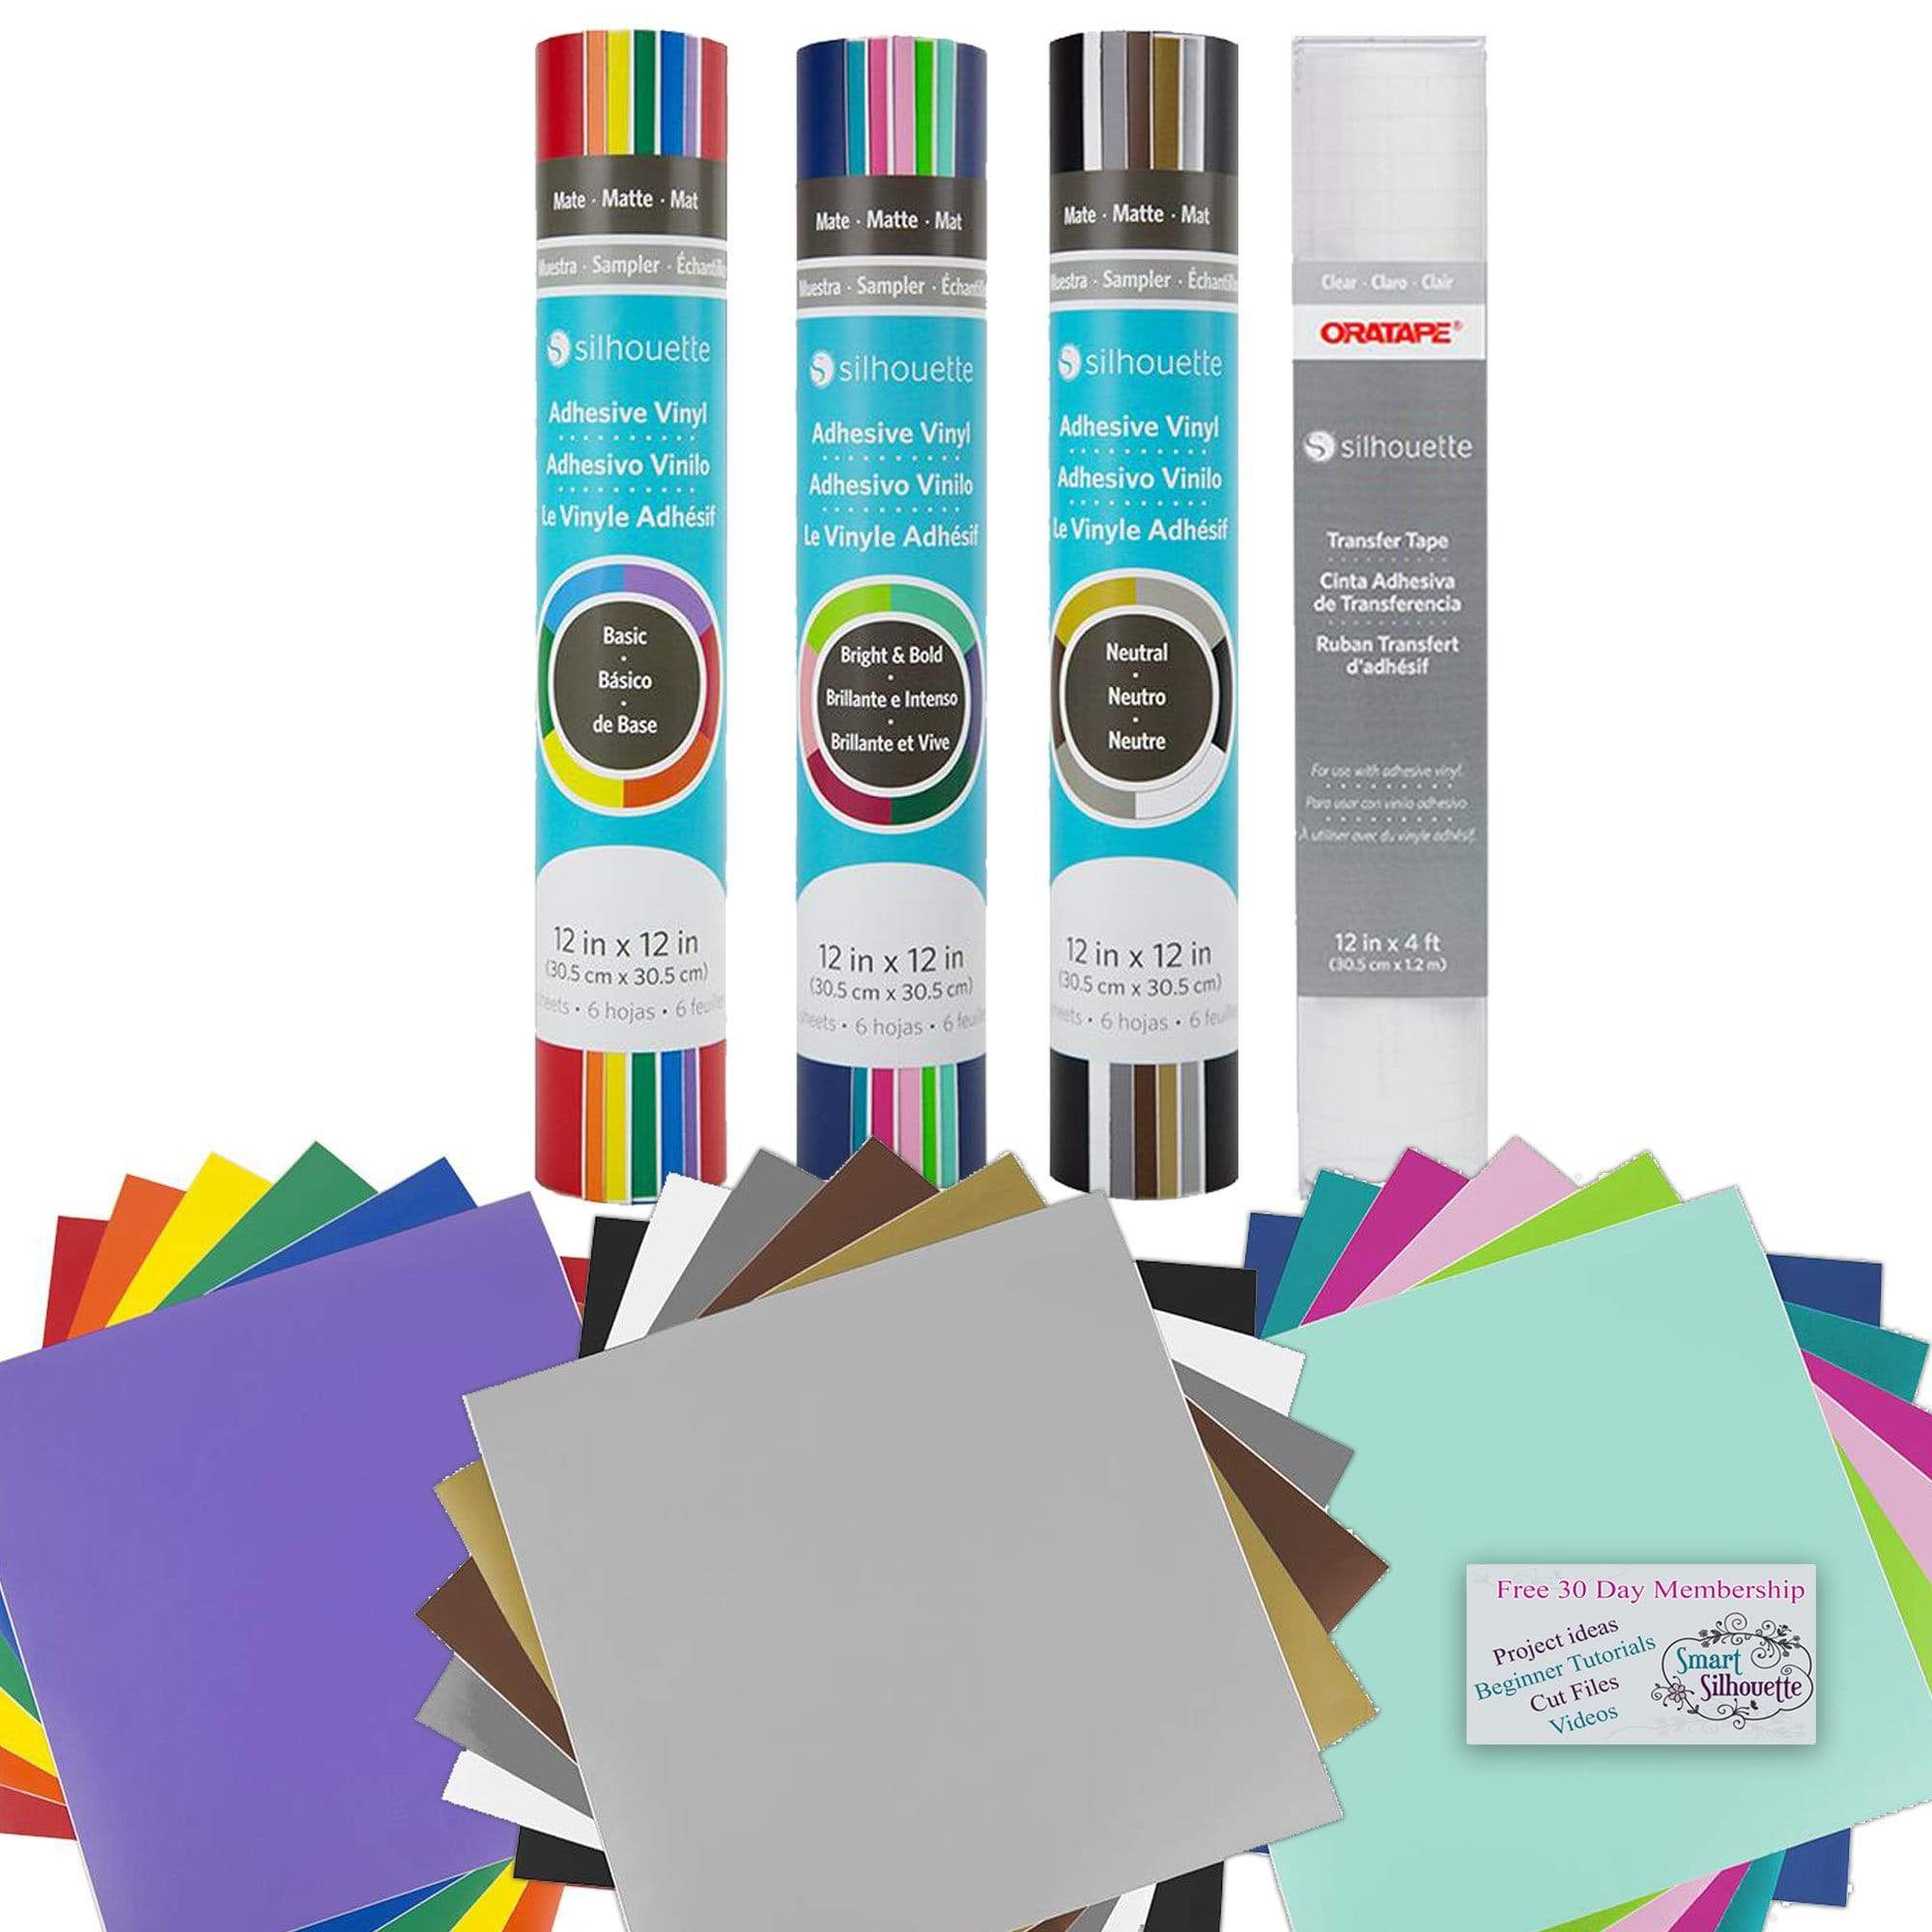 Silhouette America Vinyls Silhouette Vinyl Variety Sampler Bundle includes 18 sampler sheets of Silhouette Vinyl 12 x 12 sheets, 1 Roll of ORATAPE and a 30 day trial to Smart-Silhouette